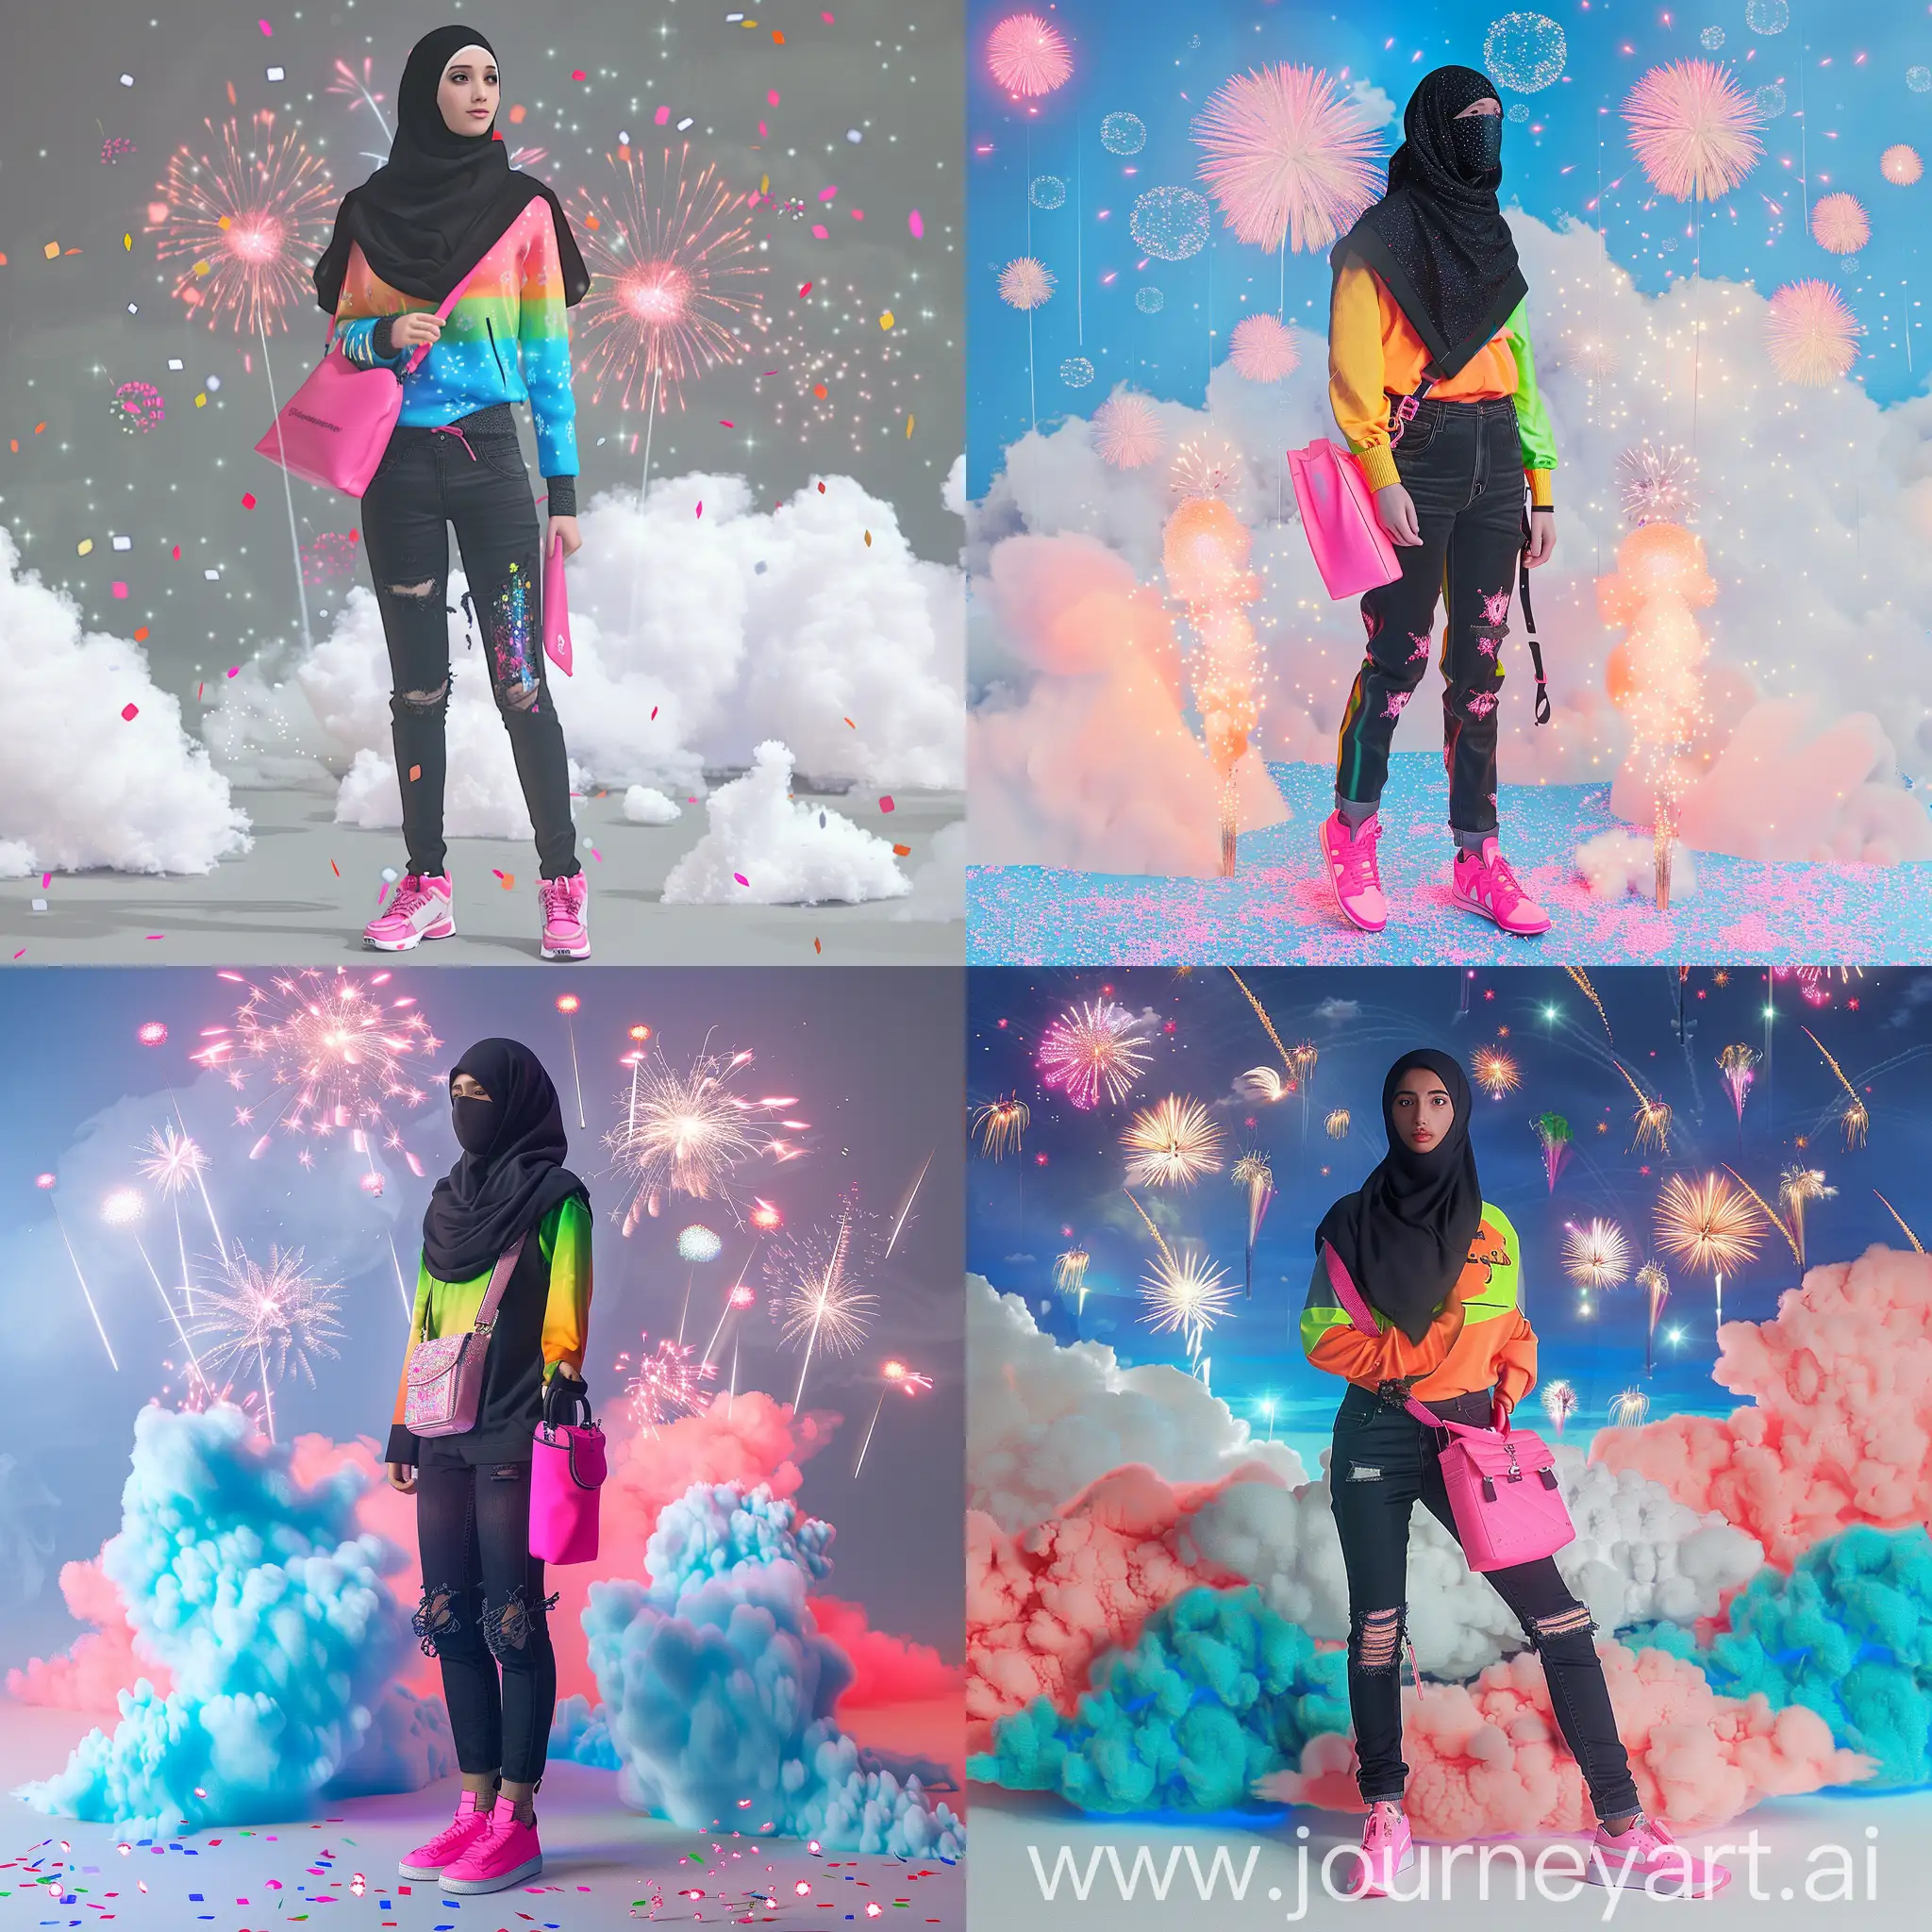 Generate a highly detailed, ultra HD image,   girl wearing a black hijab, wearing a pink side bag, wearing bright colored Muslim clothes, black jeans, pink sports shoes. Gives a cinematographic effect, momotaro, pastel colors, lots of fireworks, fluffy clouds around her   with extreme realism and clarity in the facial features. The shot should be a full-body view, capturing every intricate detail.